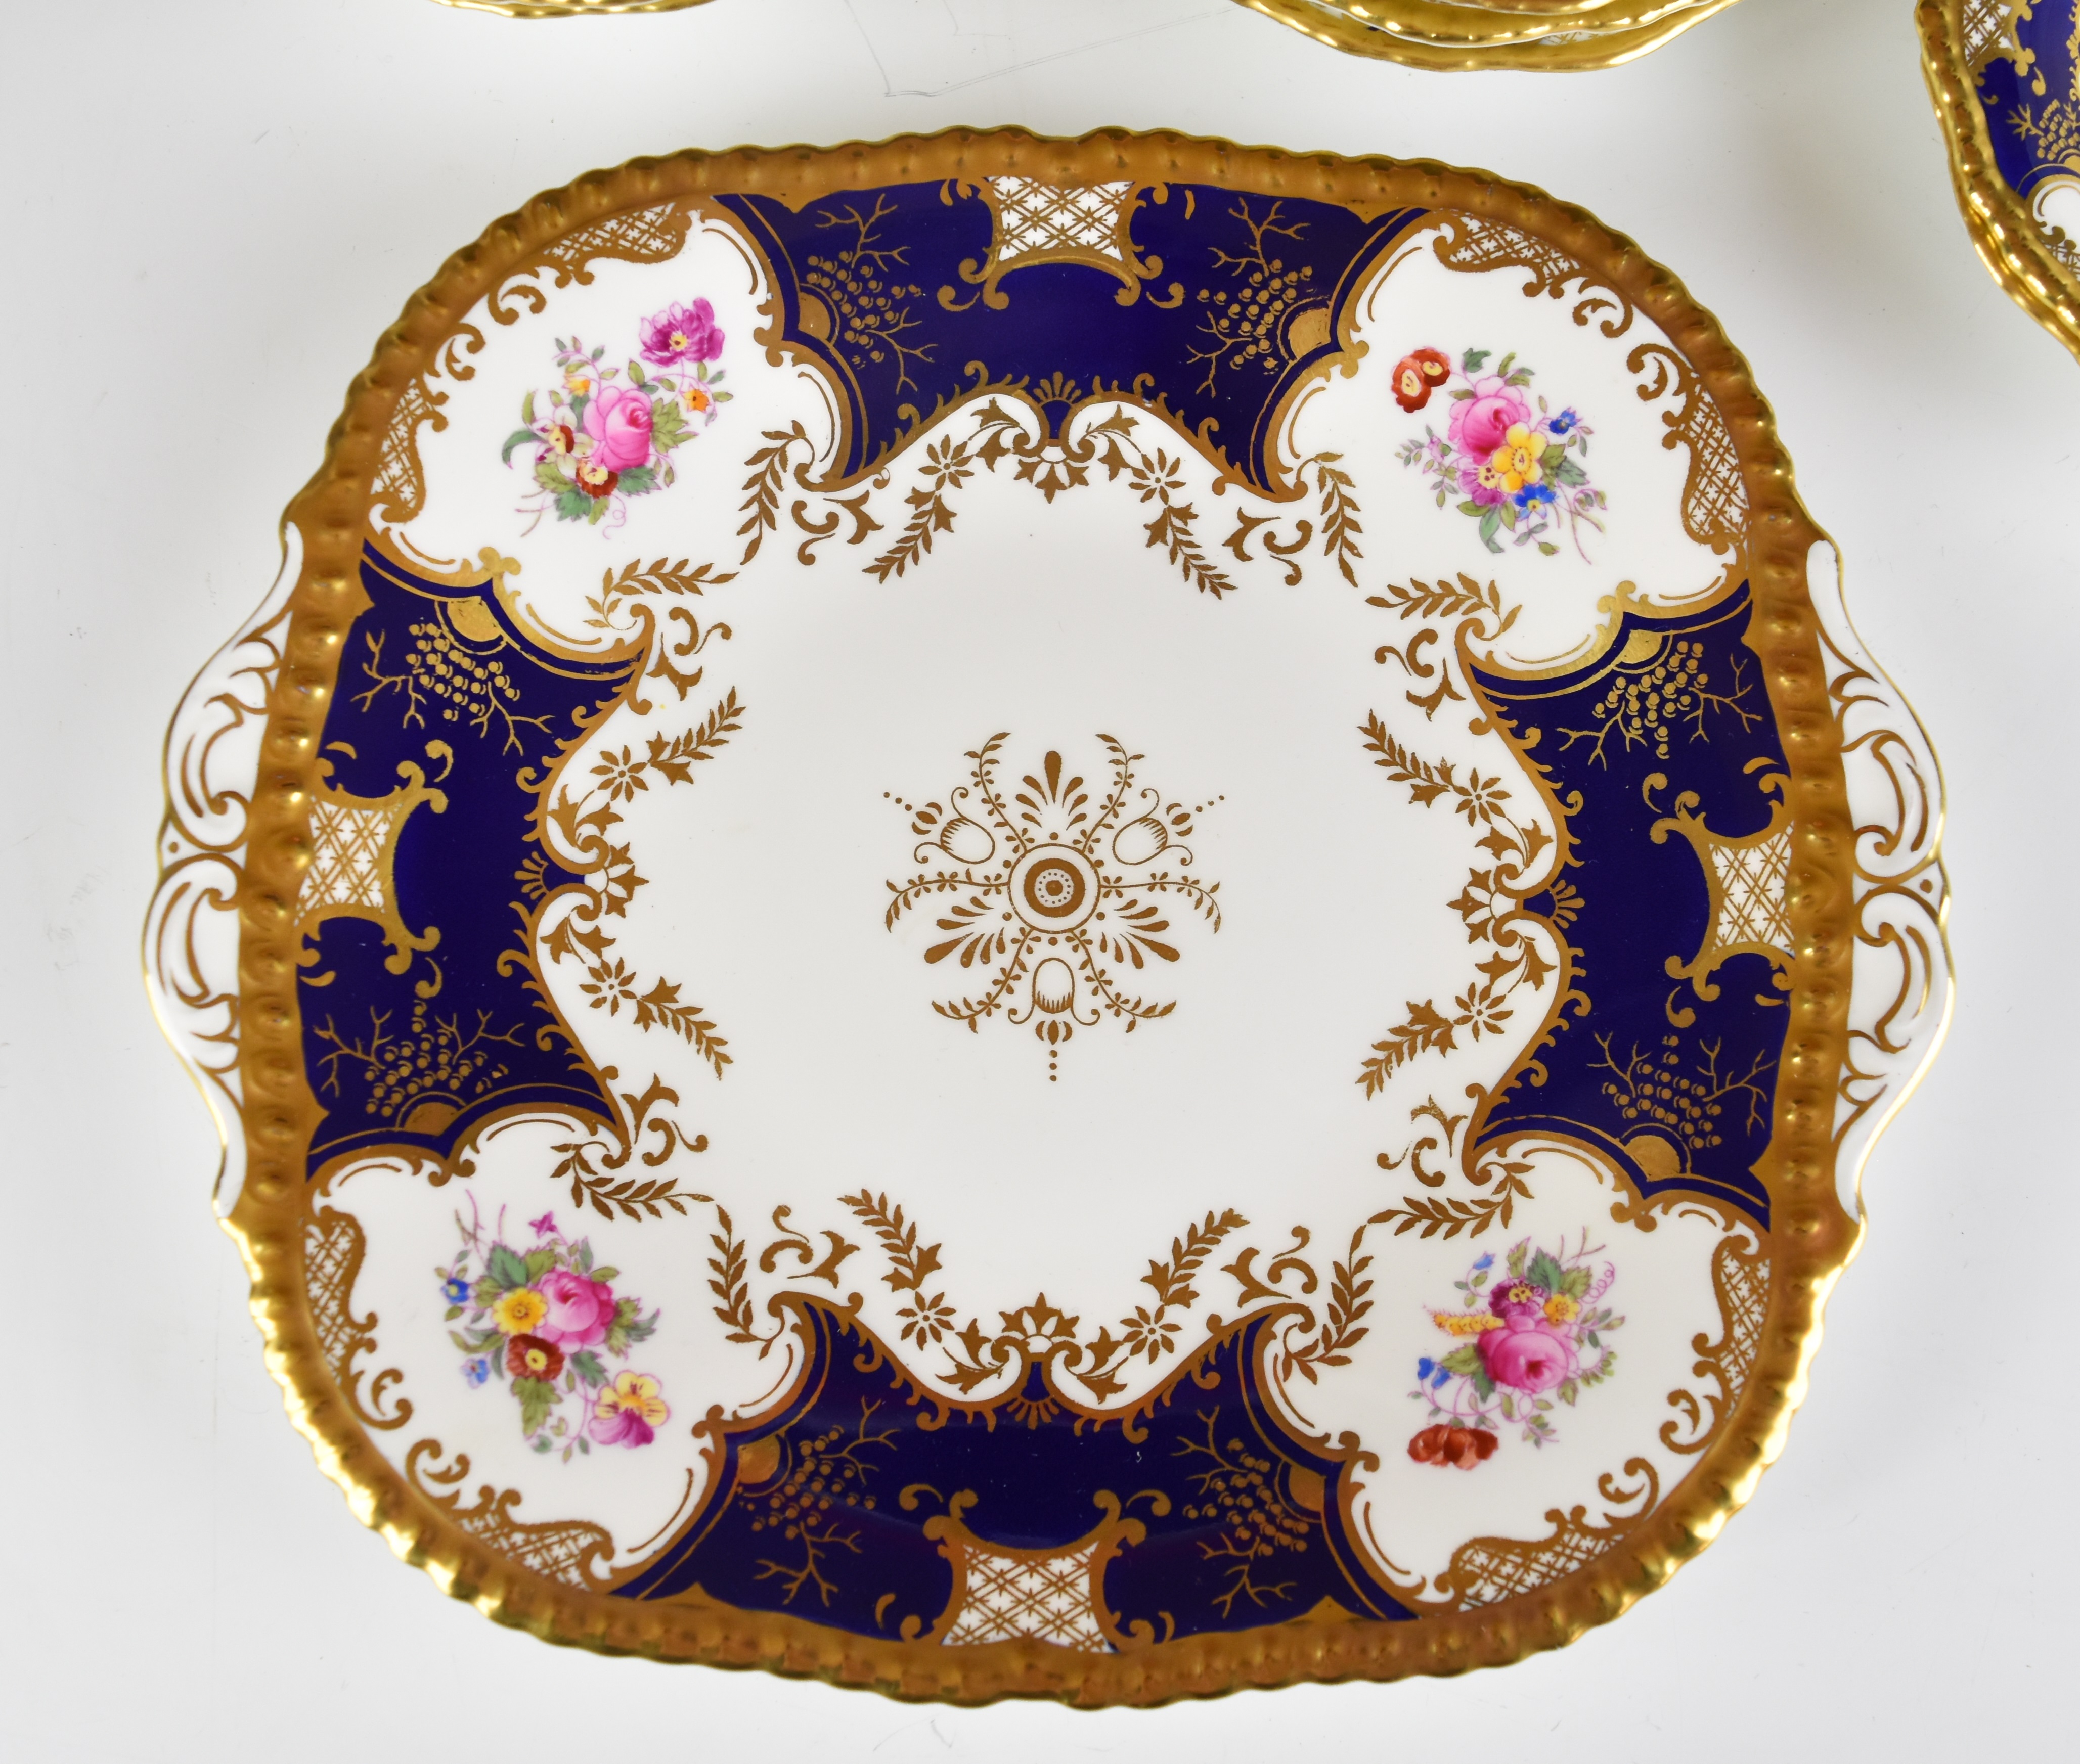 Coalport tea ware decorated in the Batwing pattern, approximately 27 pieces - Image 4 of 18